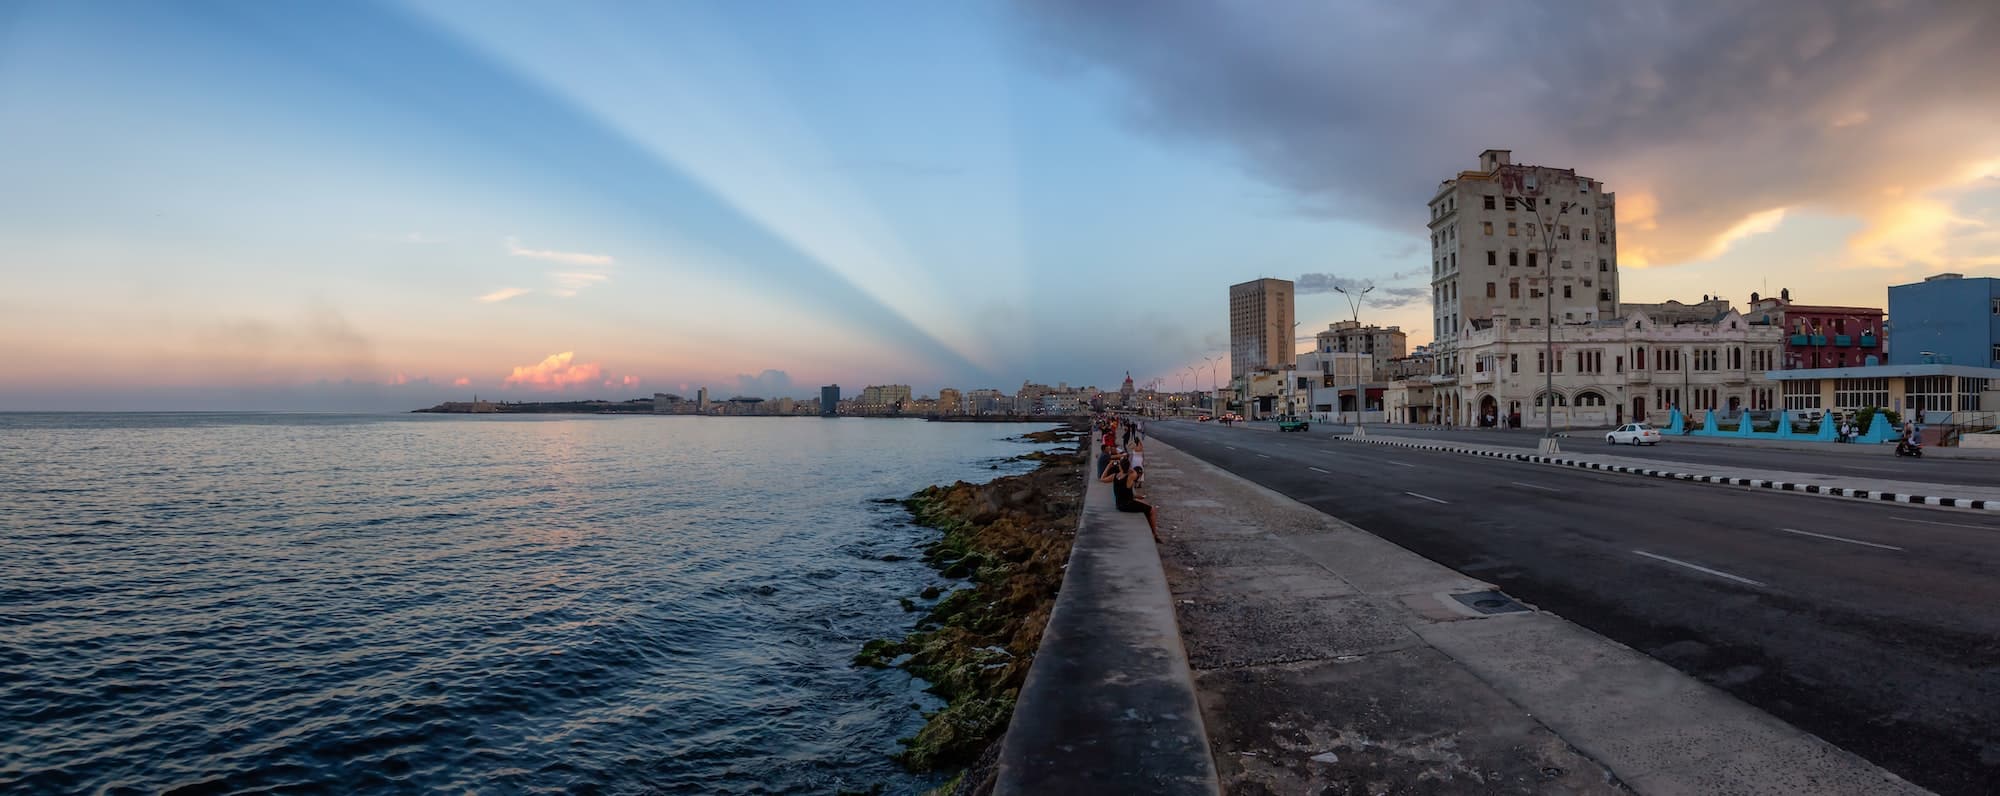 Panoramic view of the Old Havana City, Capital of Cuba, by the Ocean Coast